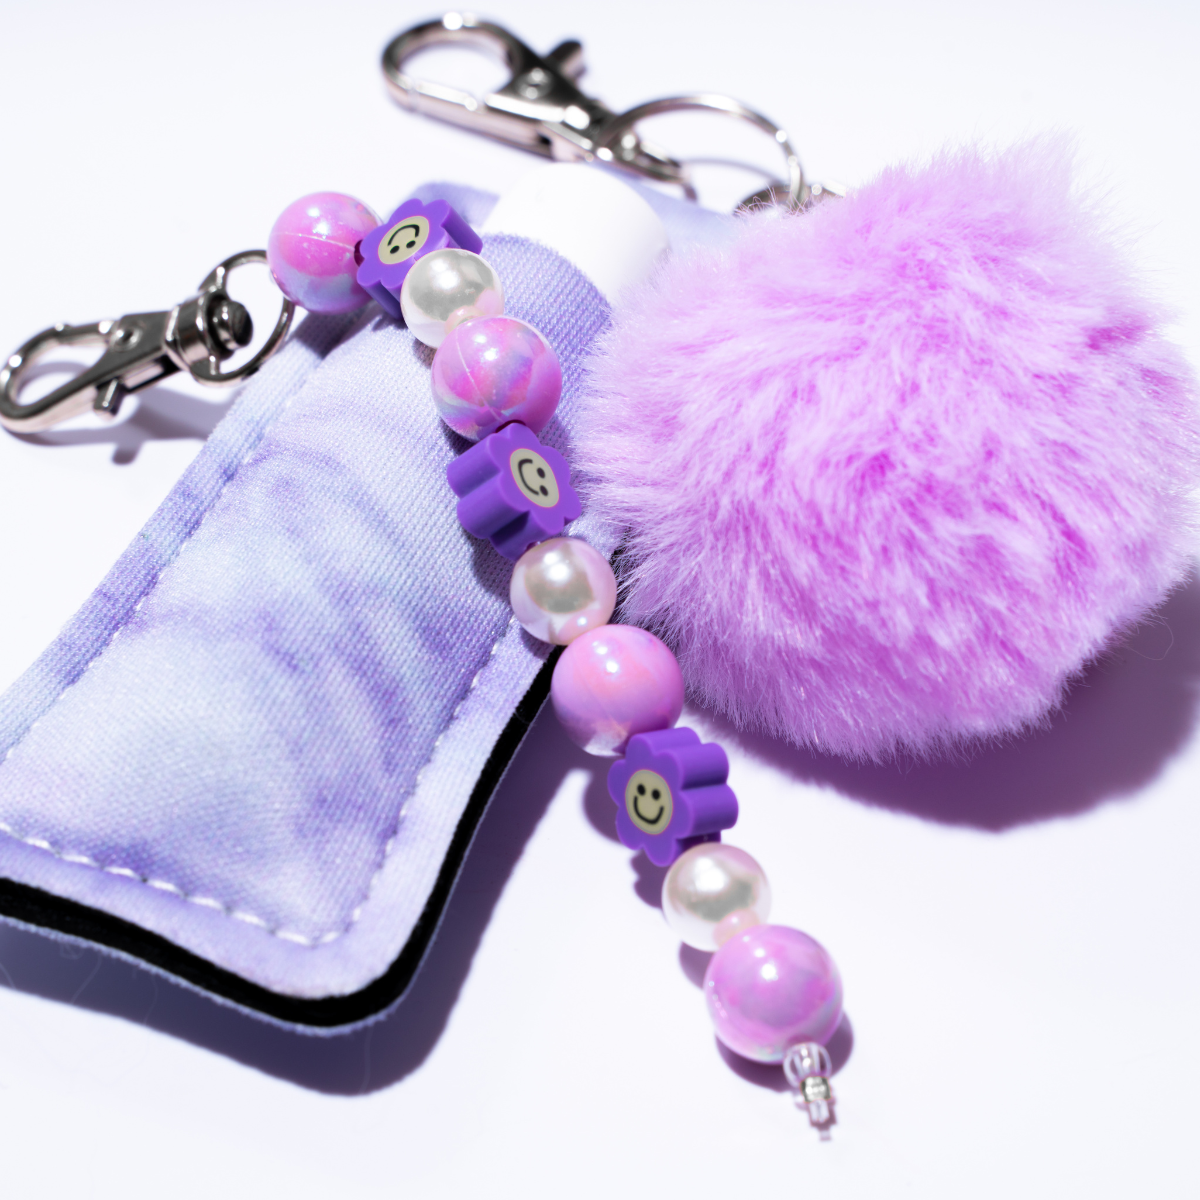 CharCharms Cow Print Holder with Pink Puff Water Bottle Charm